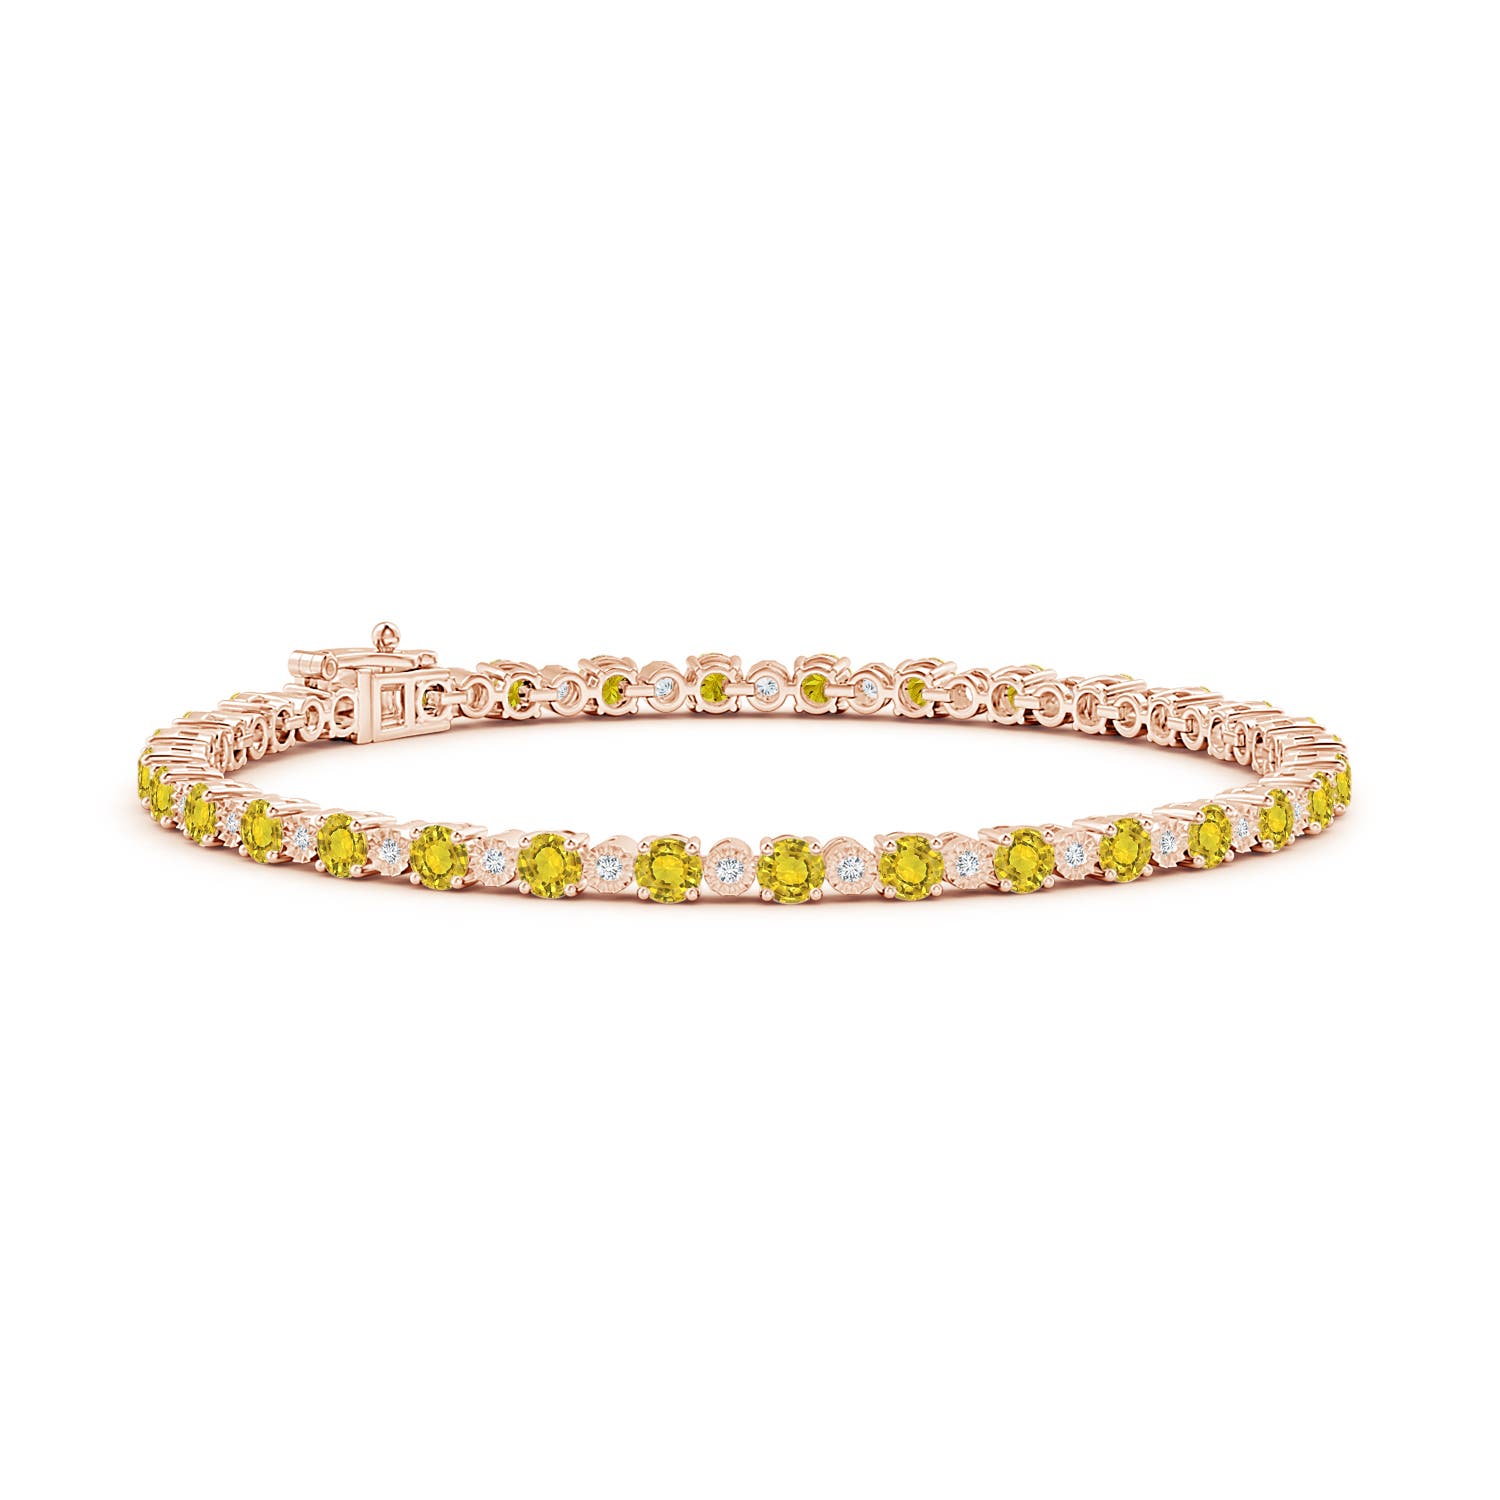 The Elegance of Yellow Sapphire Bracelets in Pure Silver